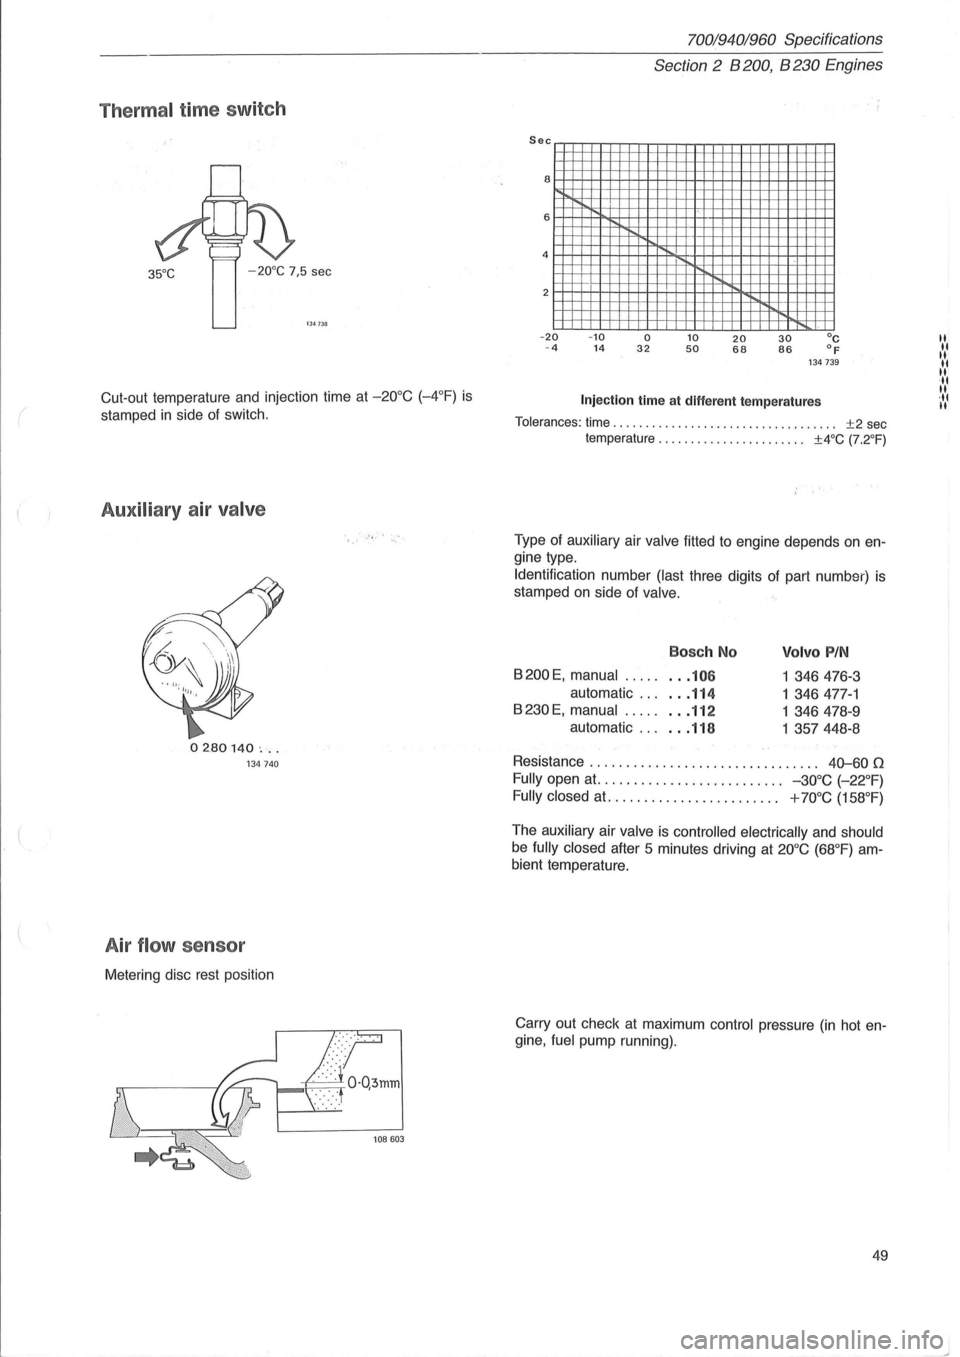 VOLVO 940 1982  Service Repair Manual Thermal time sw itch 
35°C -20°C  7,5 sec 
1 341111 
Cut -out temperature and injection  time at -20°C (-4°F) is 
stamped in side of switch. 
Auxiliary air valve 
02.80140  ... 134740 
A ir flow 